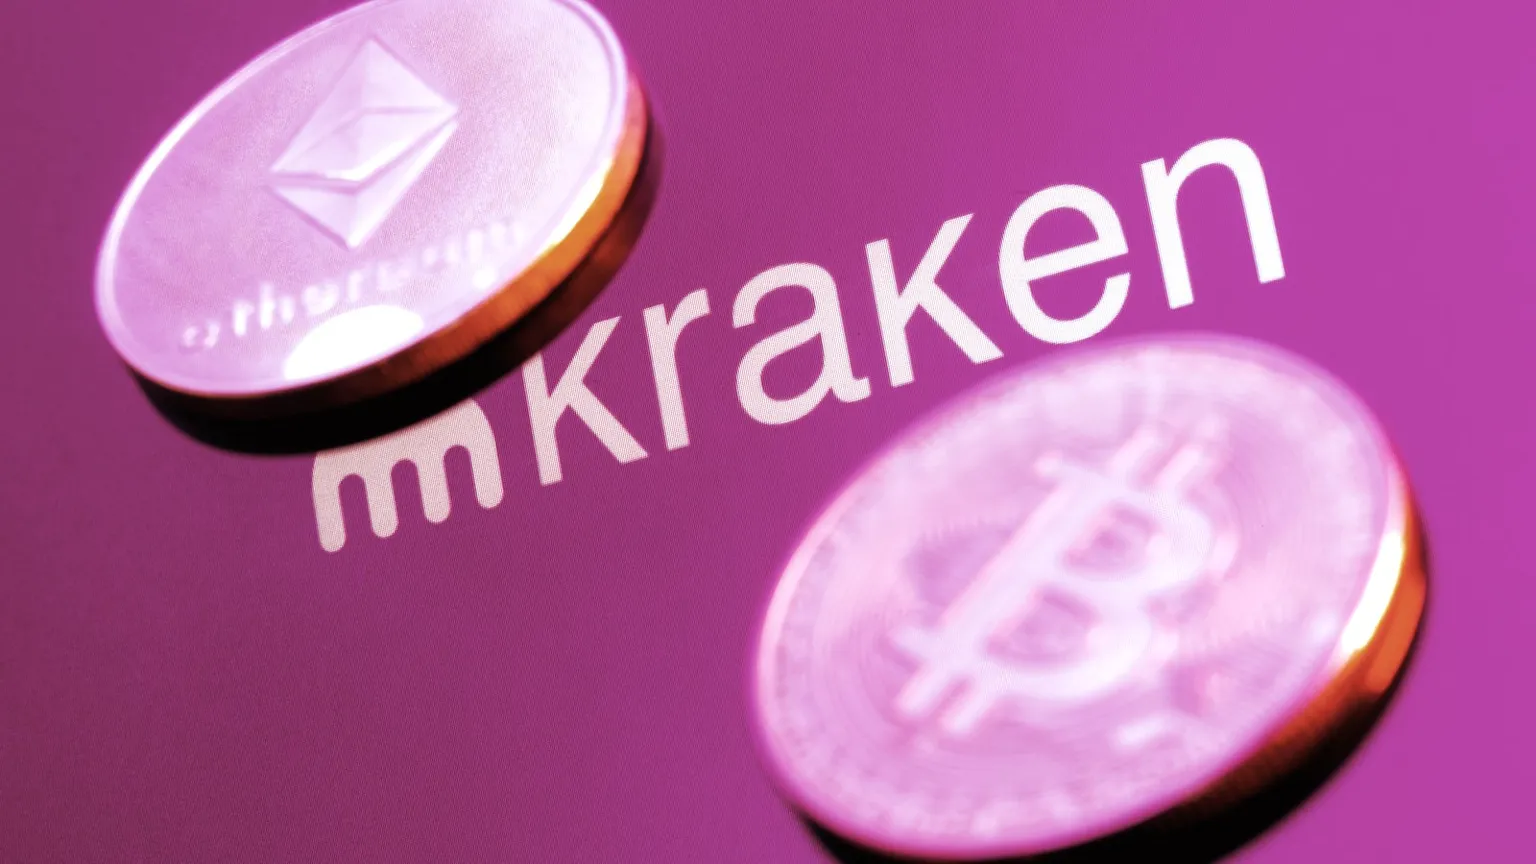 Kraken is a cryptocurrency exchange led by Jesse Powell. Image: Shutterstock